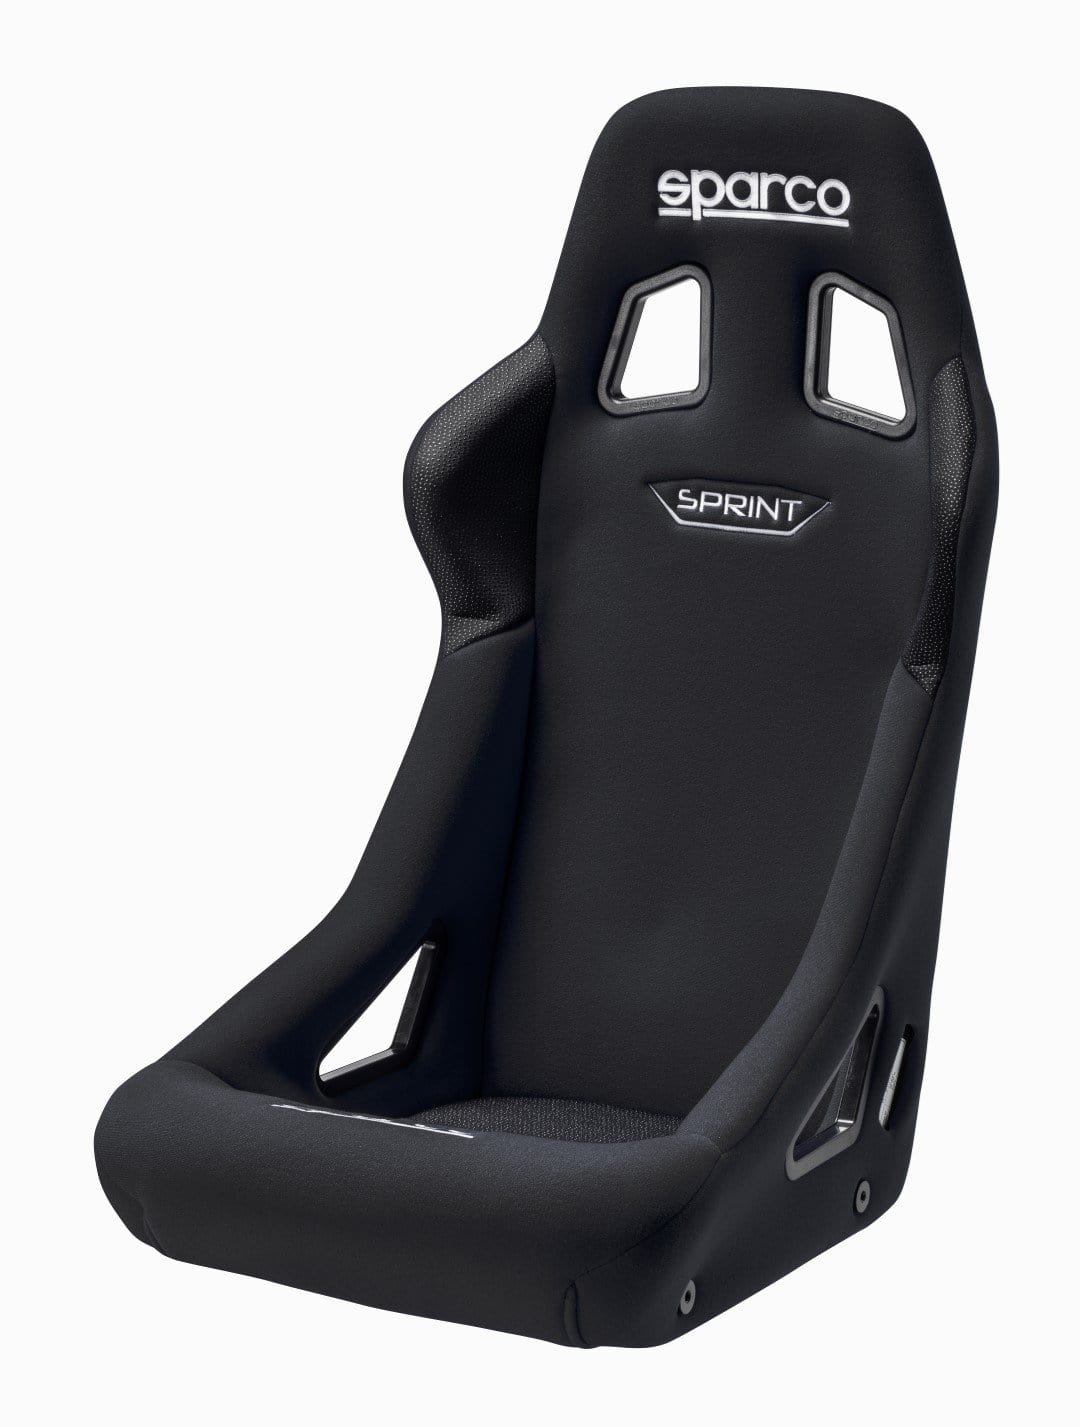 Sparco Sprint Seat (Medium) Black - Universal - Dirty Racing Products